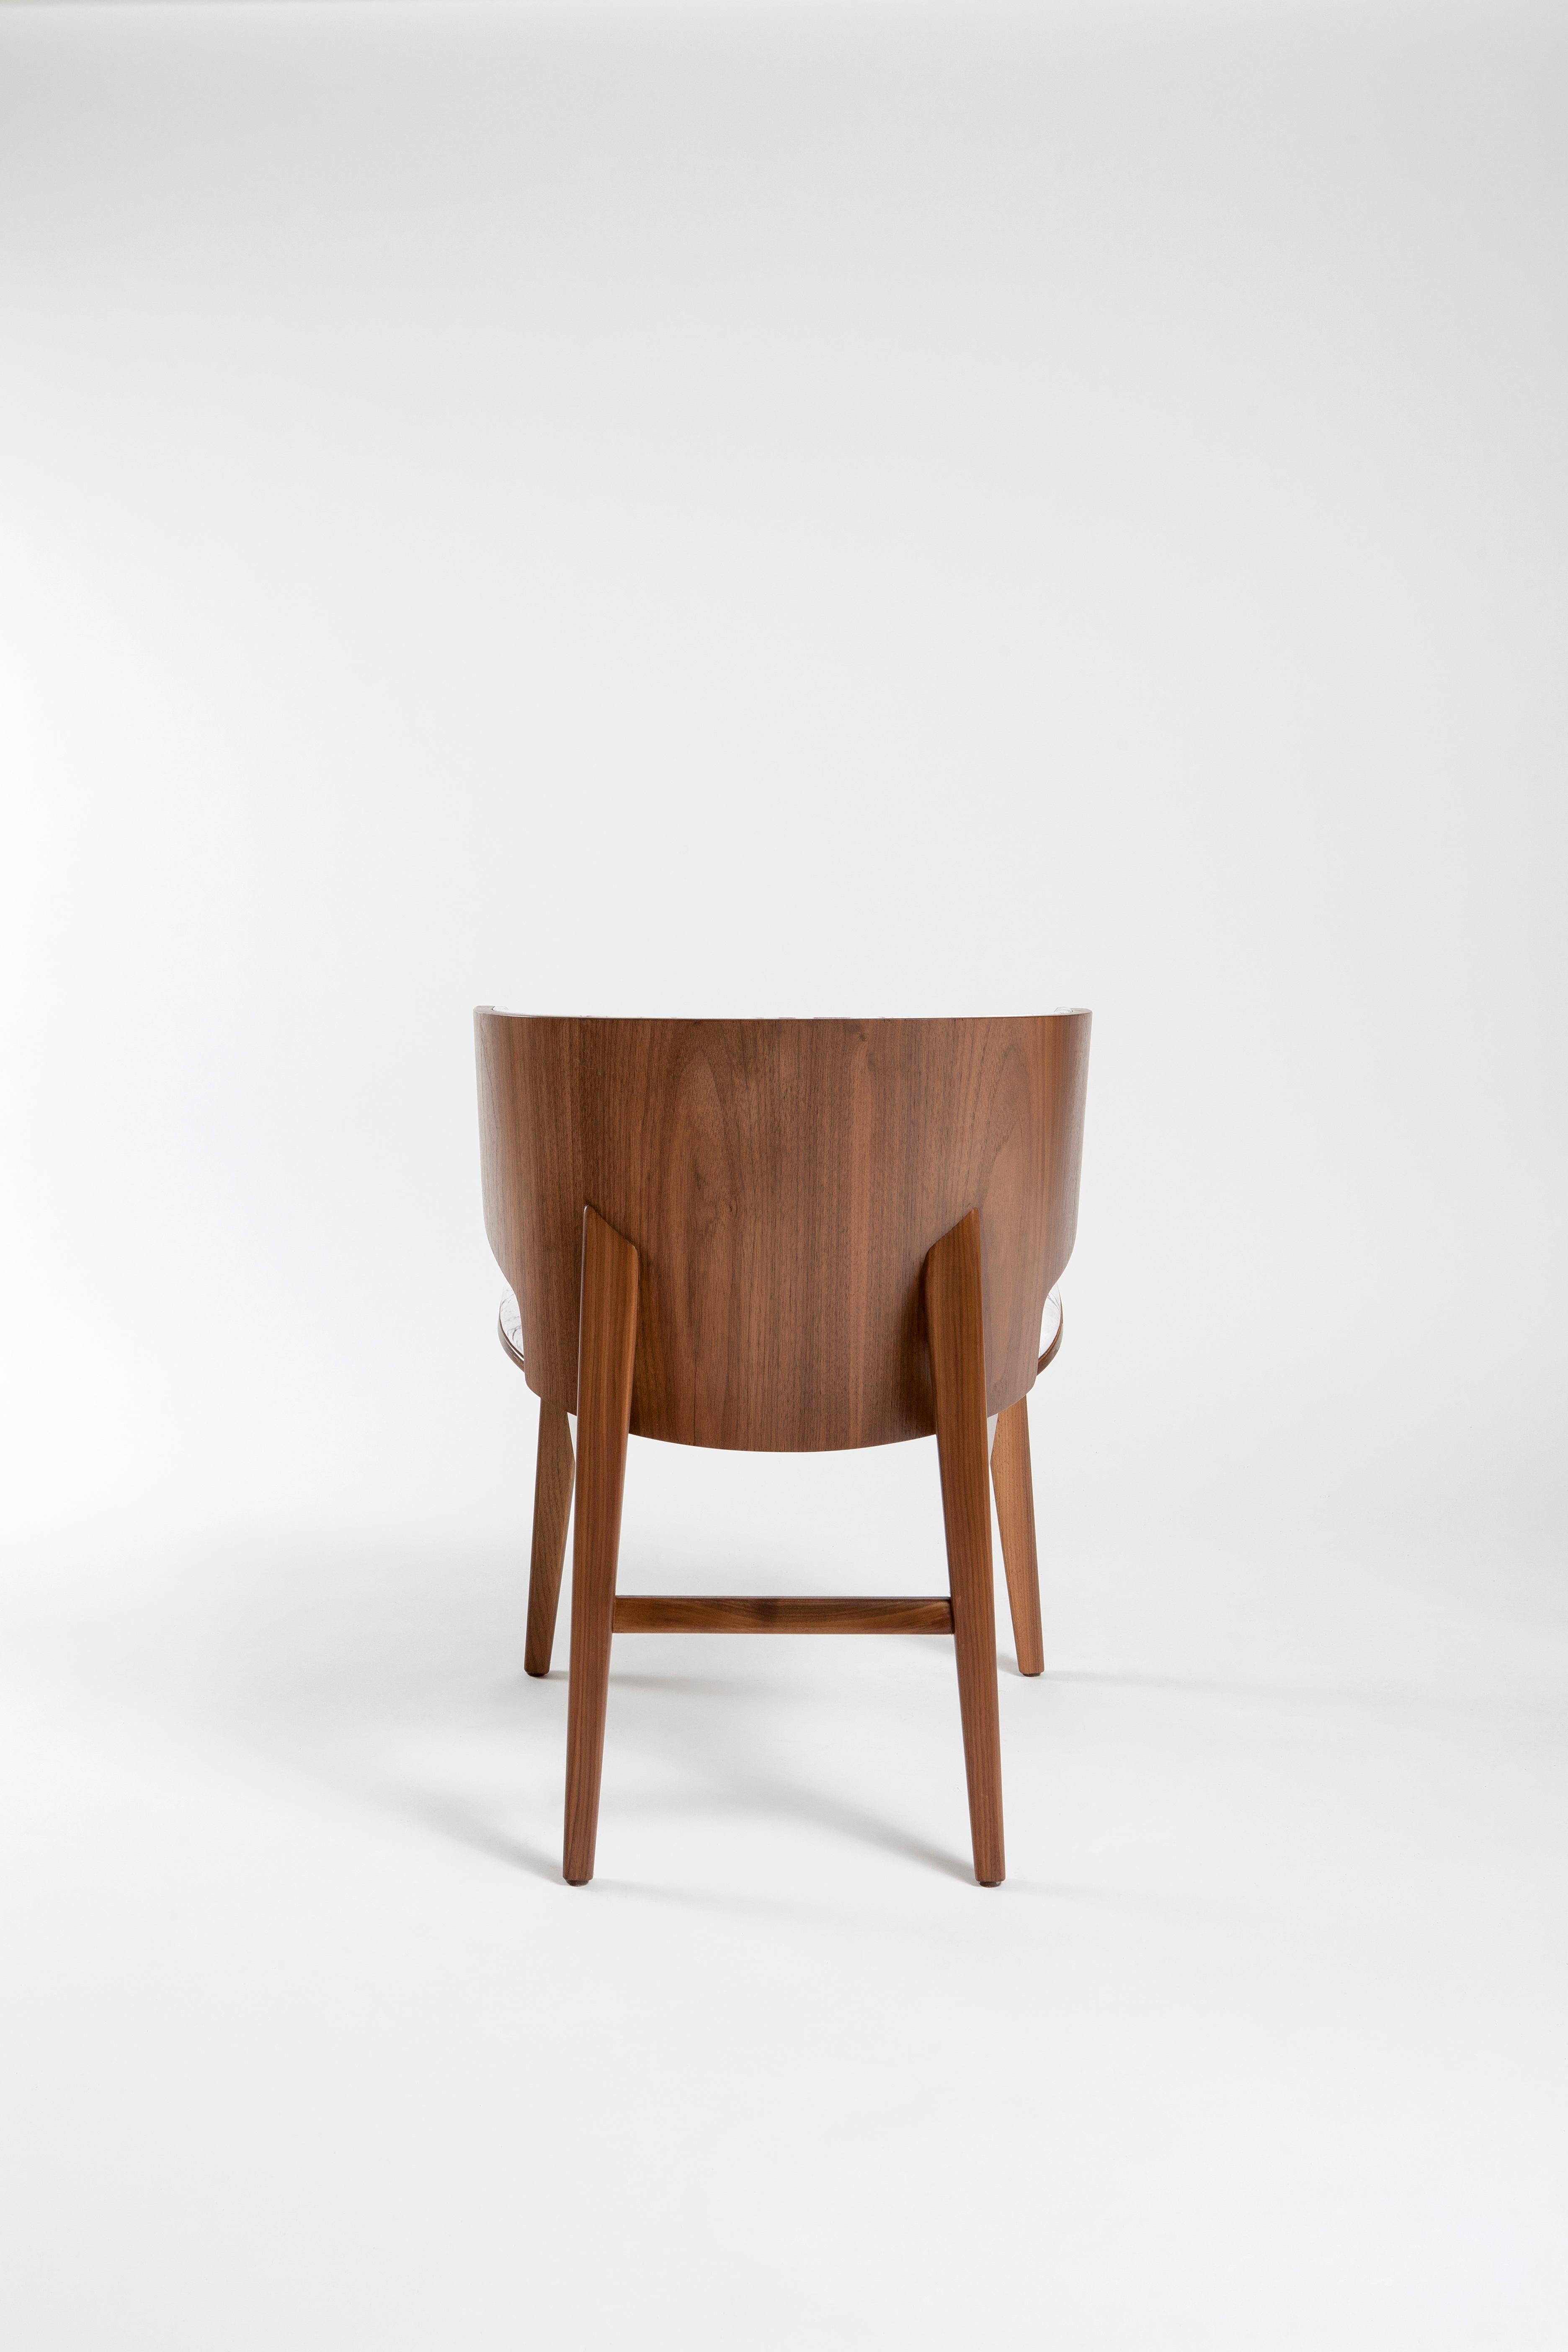 Contemporary Sarr, Mid-Century Modern Style Wooden Chair, Dining Chair, Office Chair For Sale